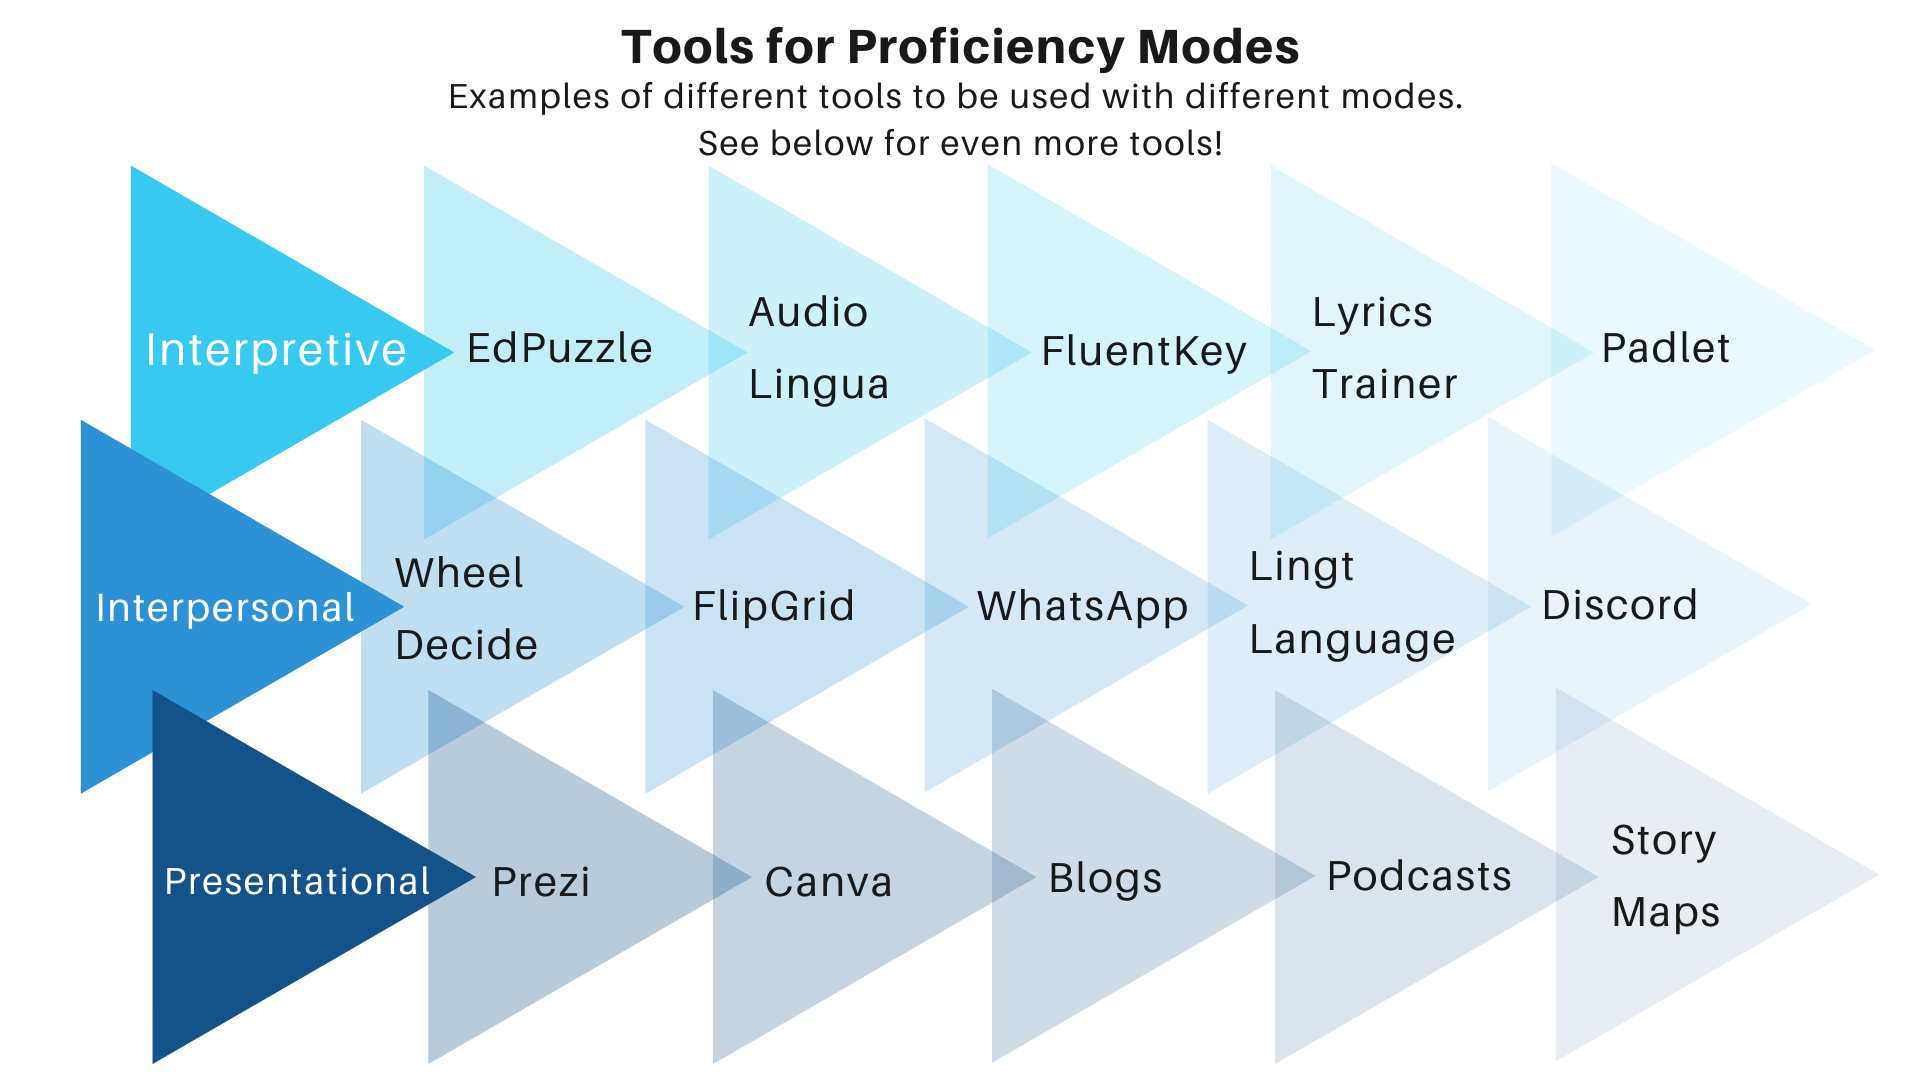 Tech tools by proficiency mode